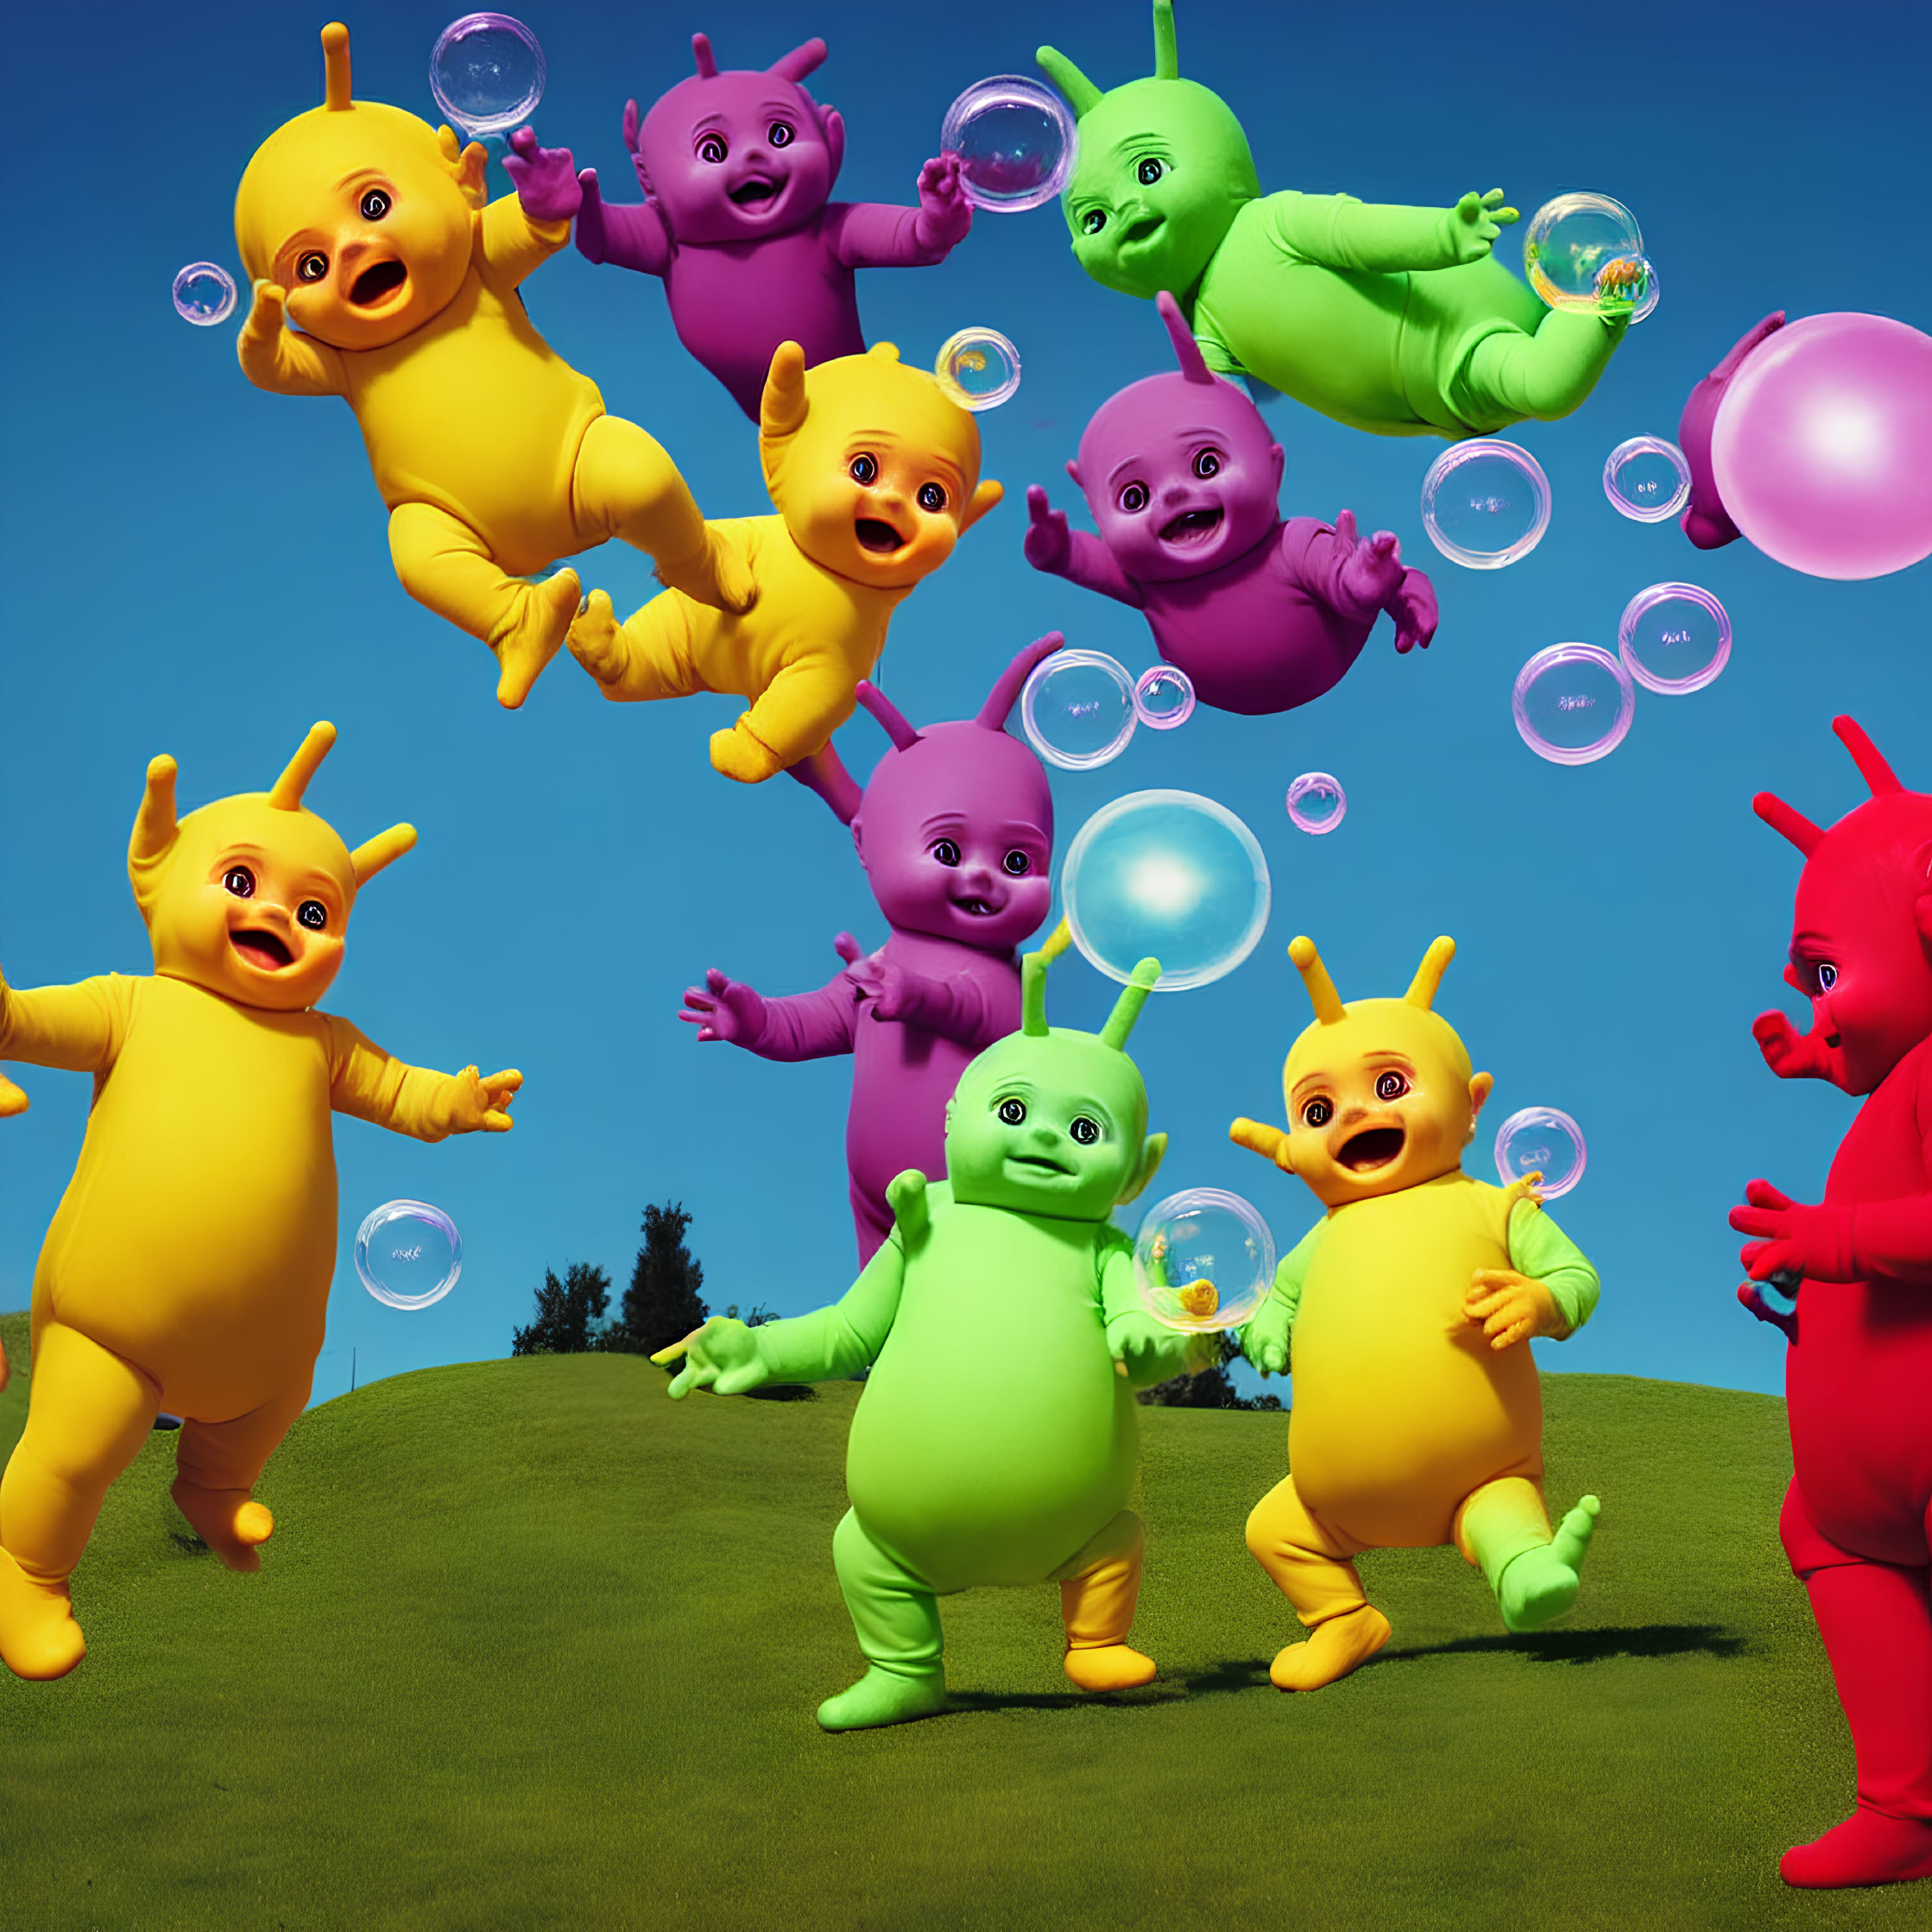 Vibrant animated baby-like characters playing with bubbles on grassy hill